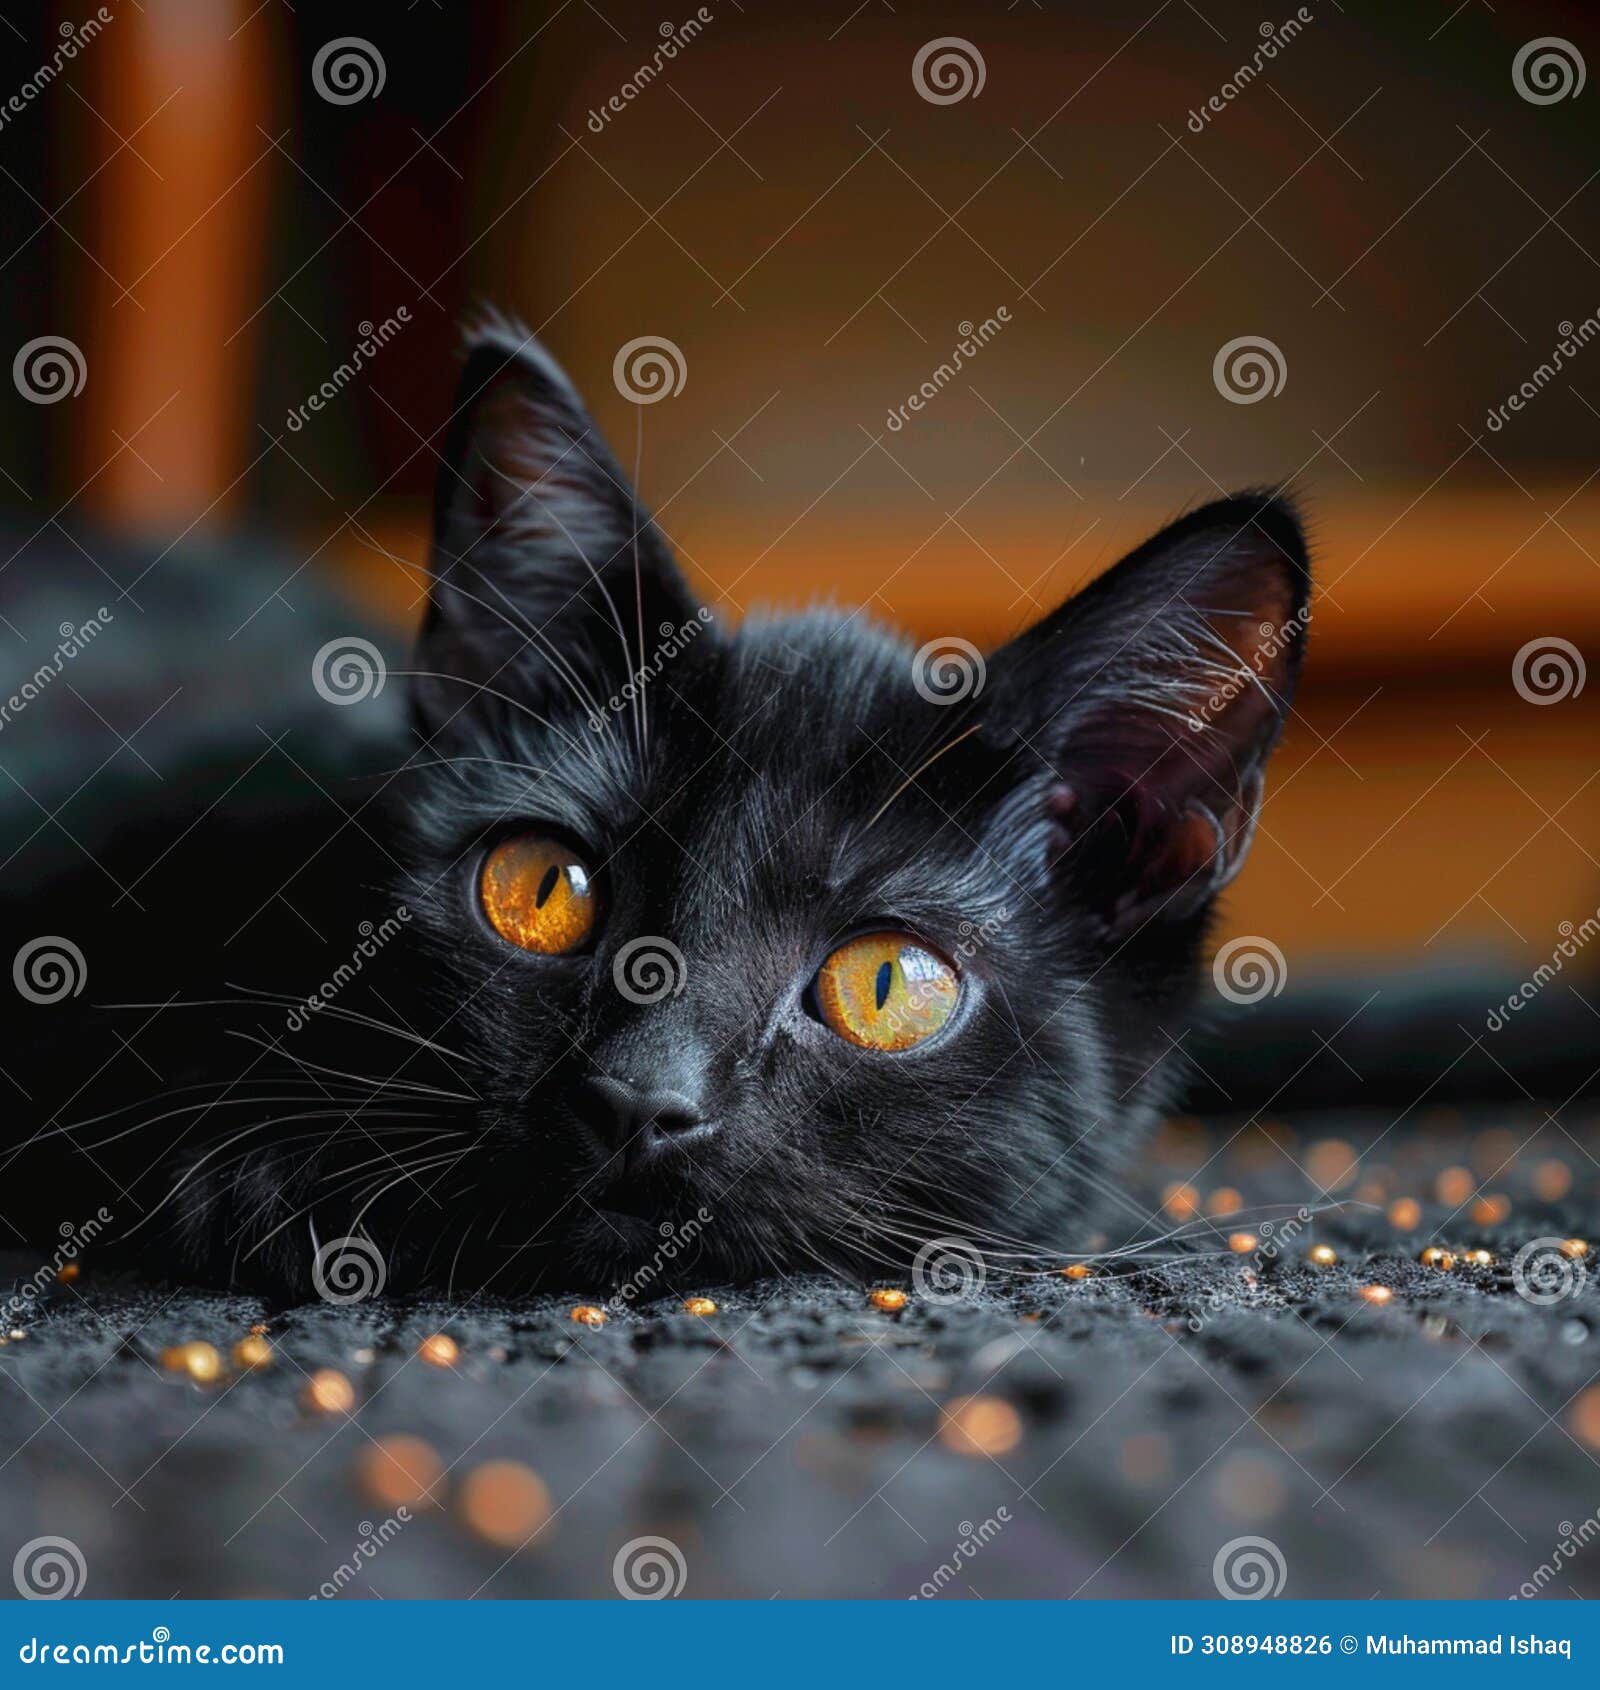 enigmatic black cat on the ground, piercing yellow eyes captivate viewers